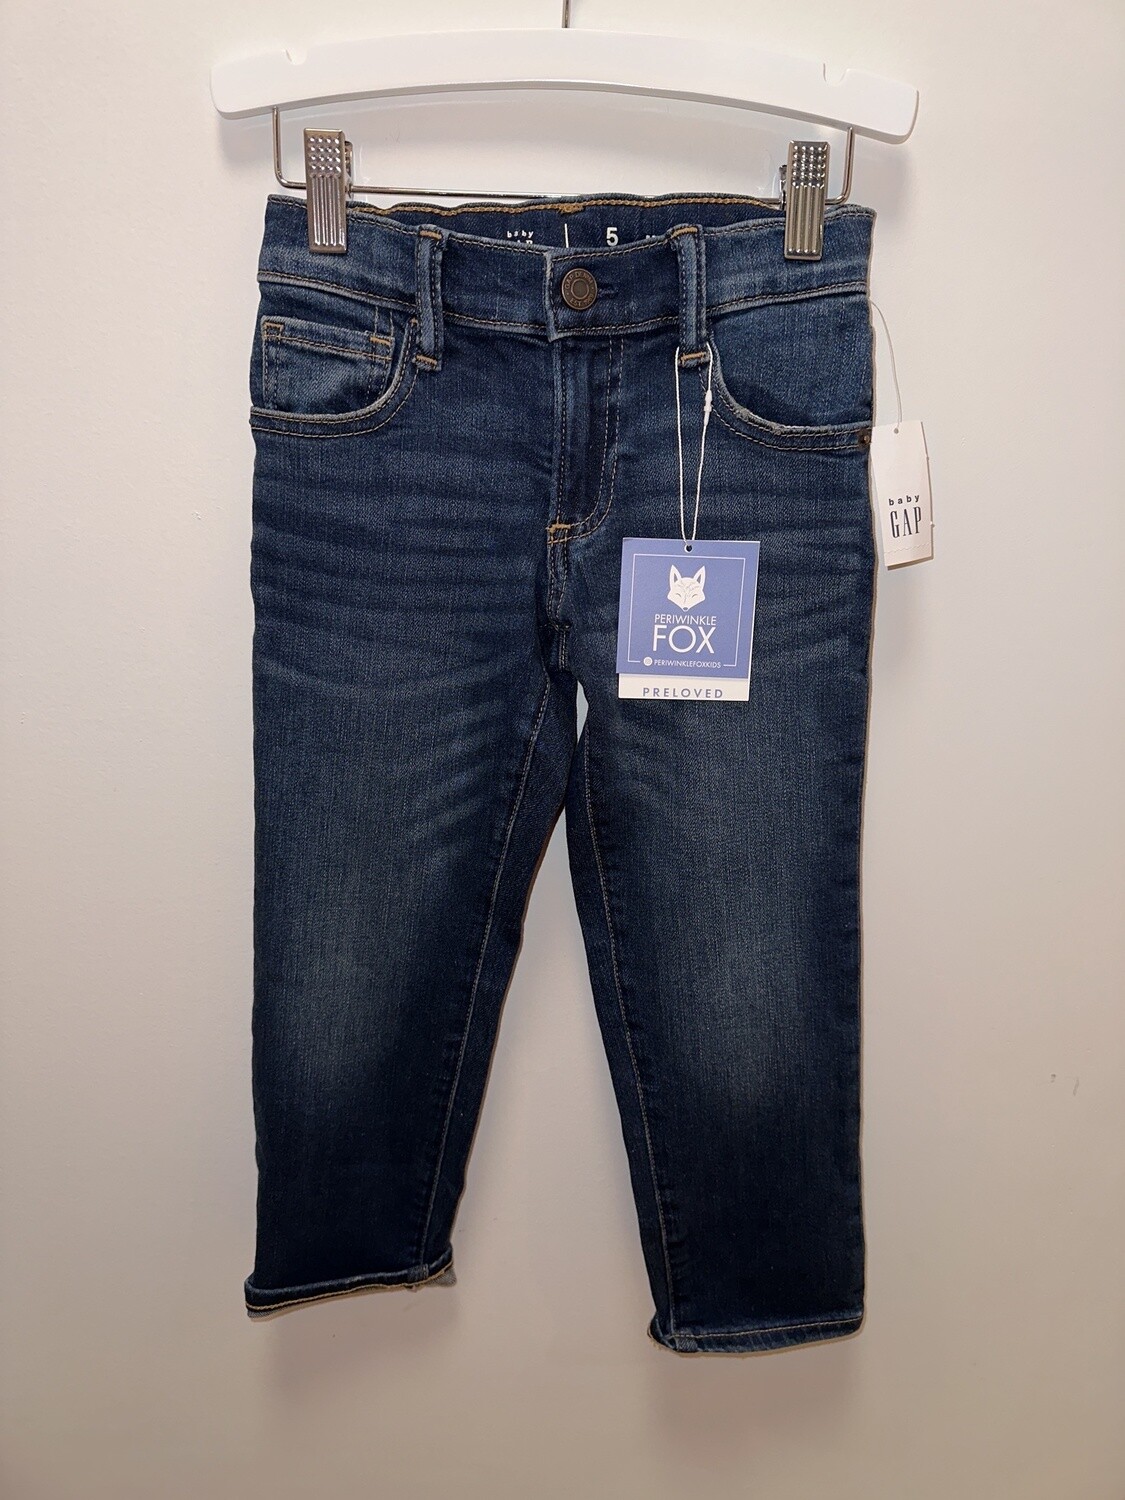 New with Tags - GAP - Jeans - 5T - PWE165